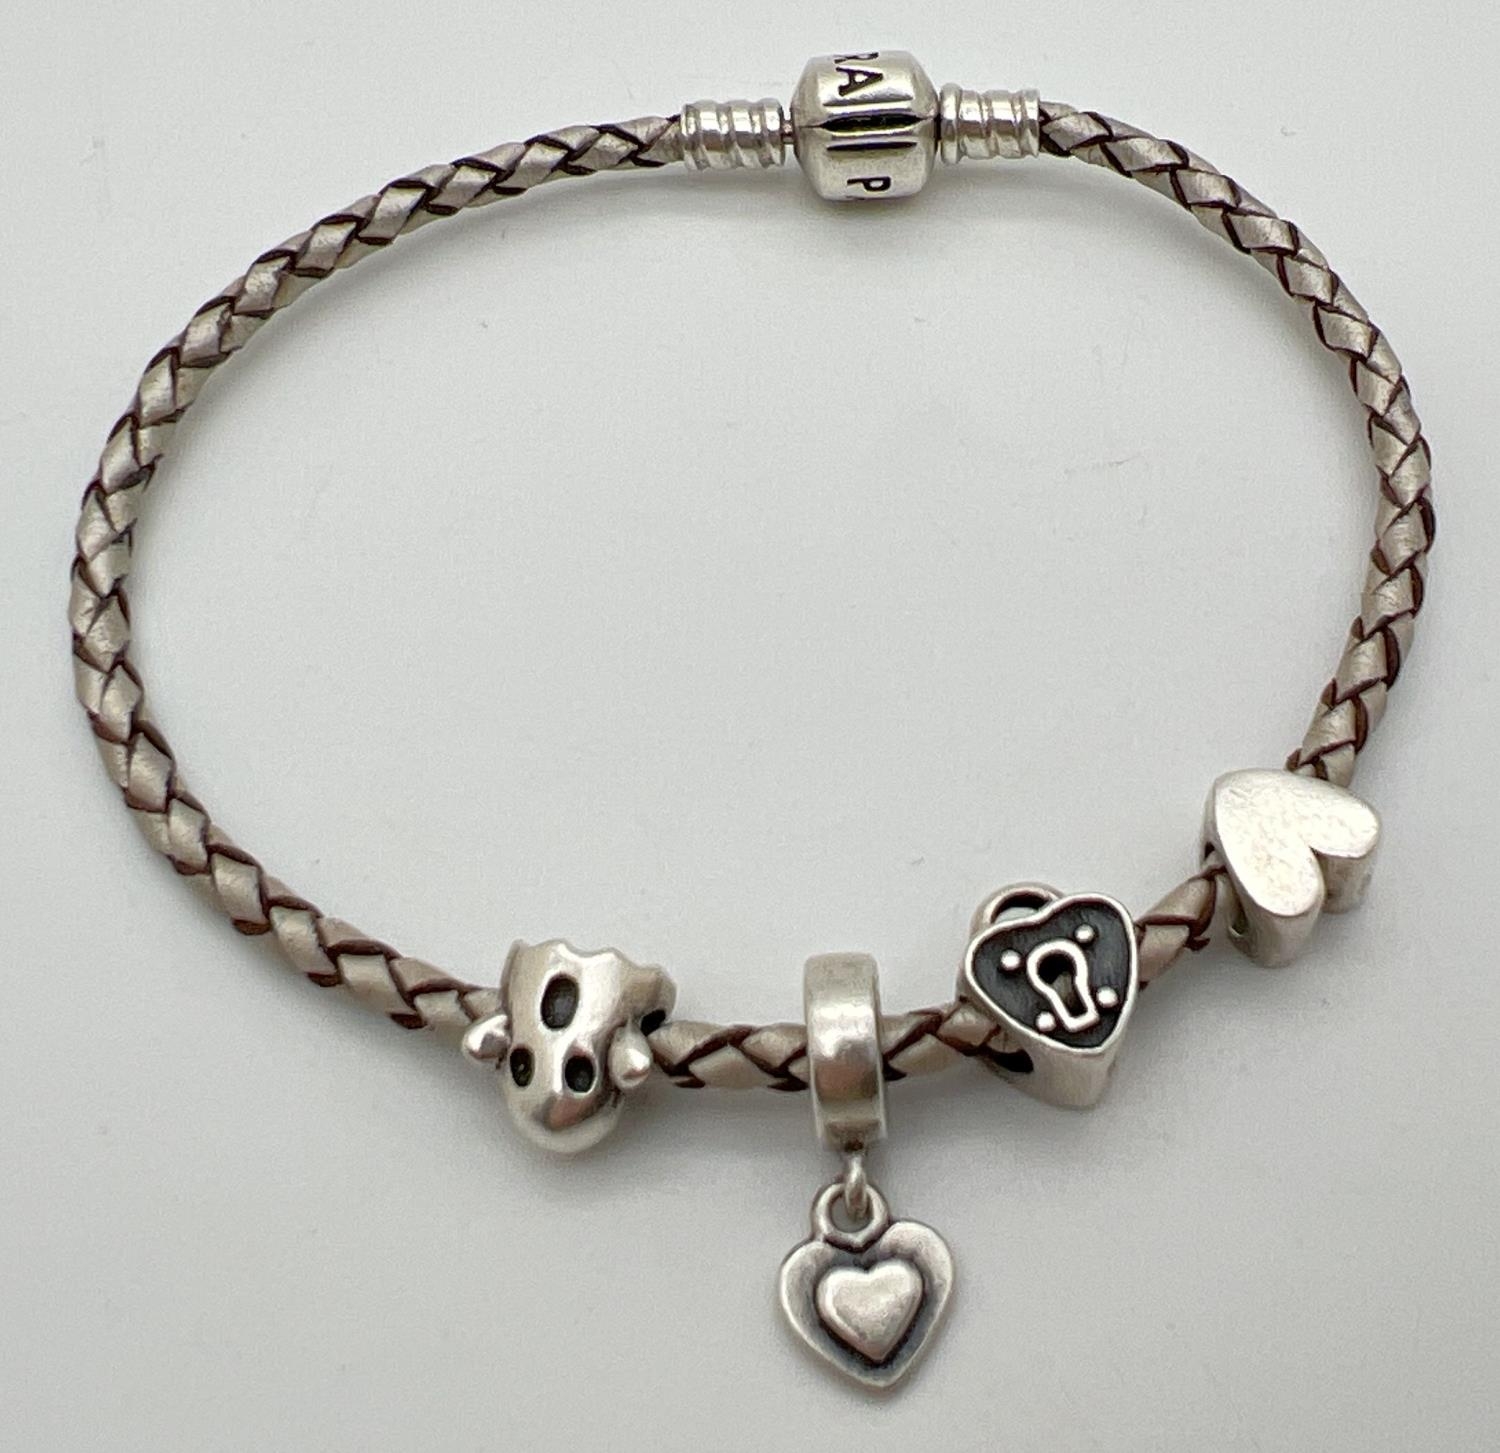 An 8" silver leather plaited charm bracelet by Pandora with 4 charms. Charms comprise: solid